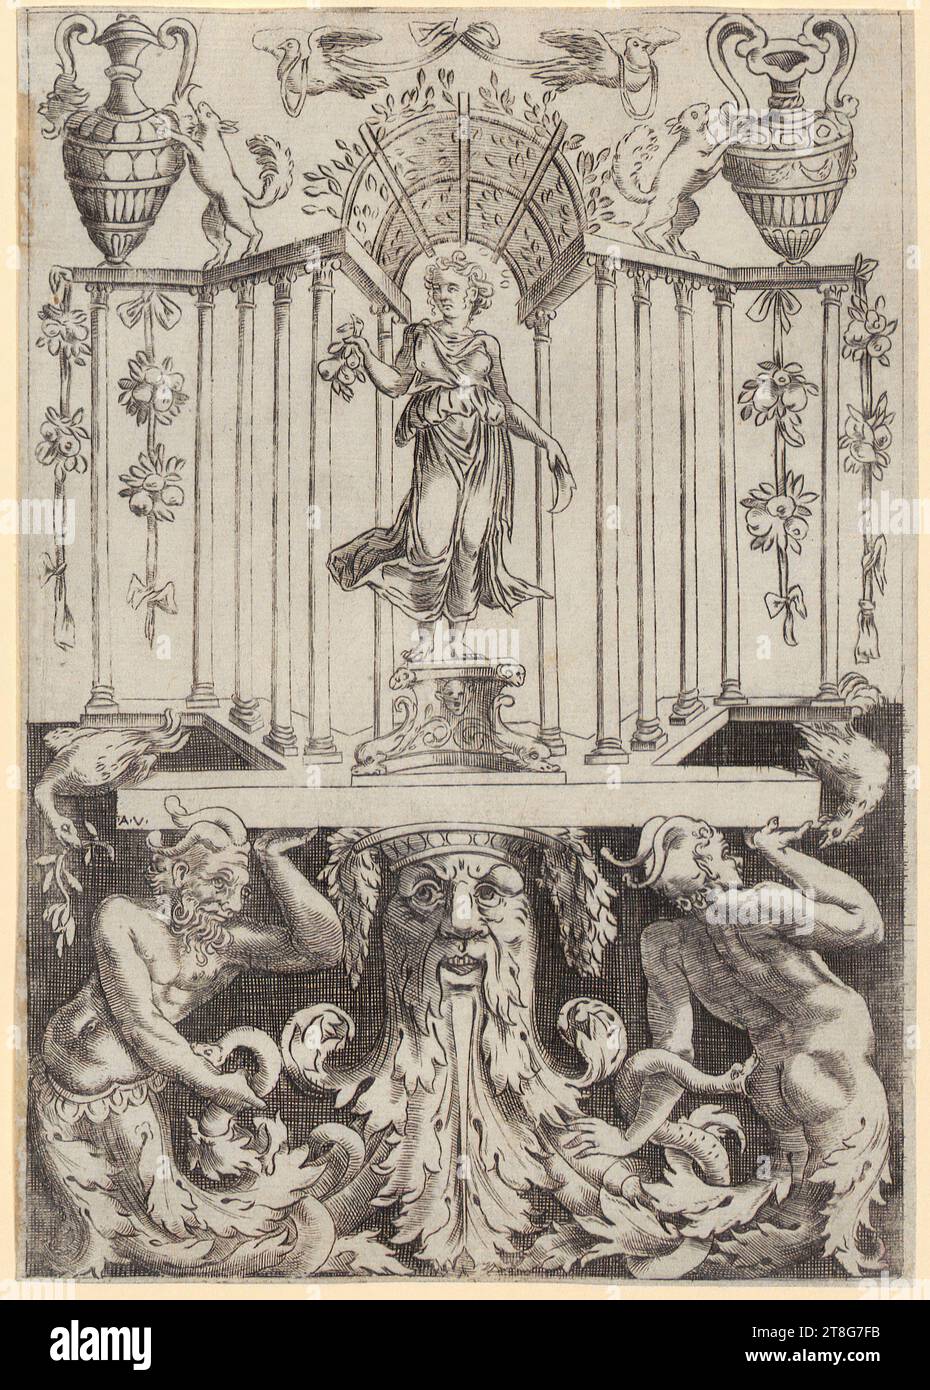 Agostino dei Musi (gen. Agostino Veneziano) (1490 um - after 1536)Raphael (1483 - 1520), after Giovanni da Udine (1487 - 1561), after, ornamental engraving with the goddess Pomona in temple, sheet 16 of the series 'Twenty Ornamental Engravings', origin of the printing medium: 1530 - 1535, copperplate engraving, sheet size: 20.4 x 14.3 cm, center left on ledge monogrammed '.A.V Stock Photo